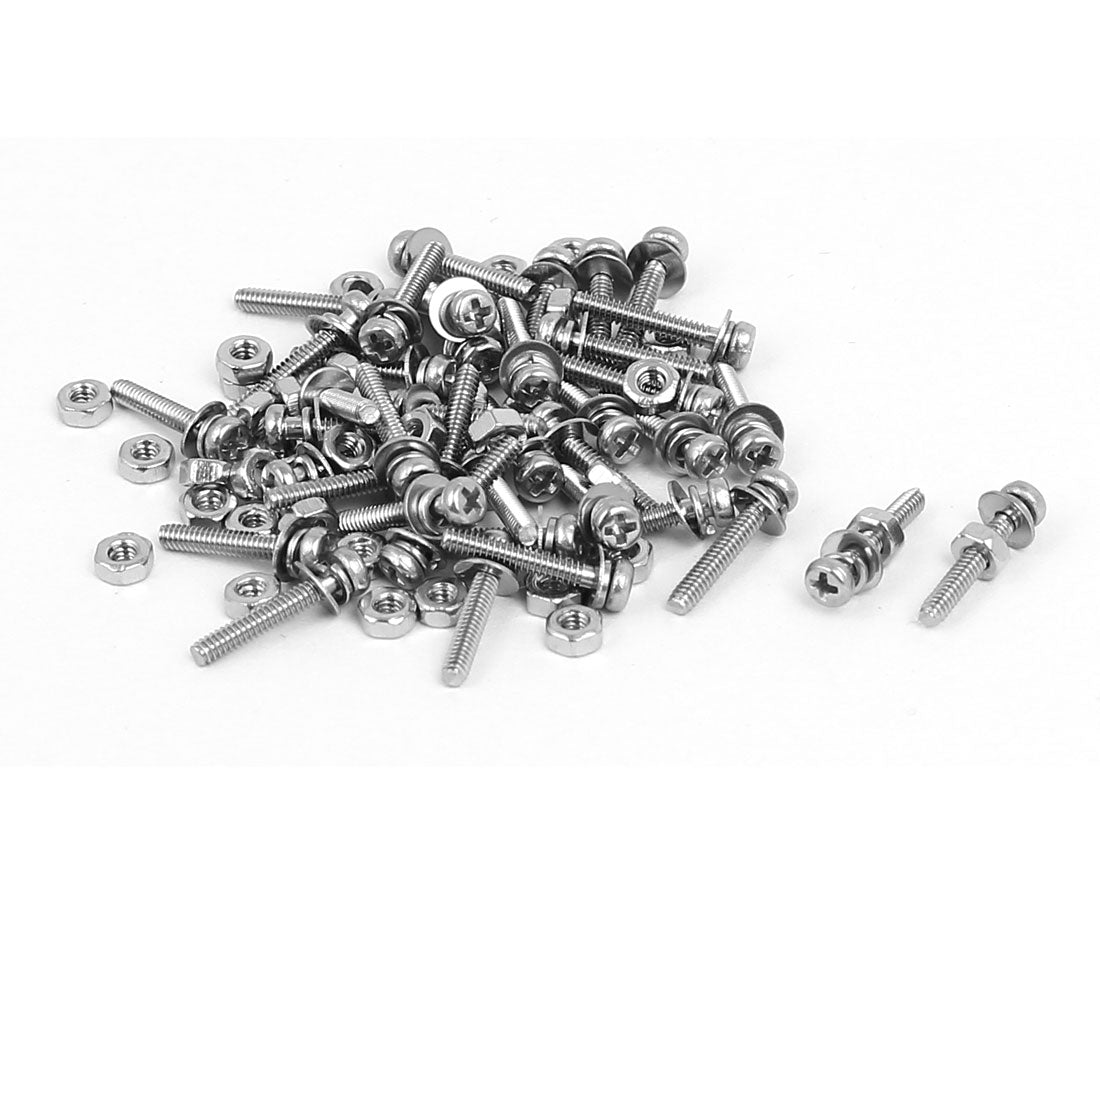 uxcell Uxcell M1.6 x 10mm 304 Stainless Steel Phillips Pan Head Screws Nuts w Washers 40 Sets